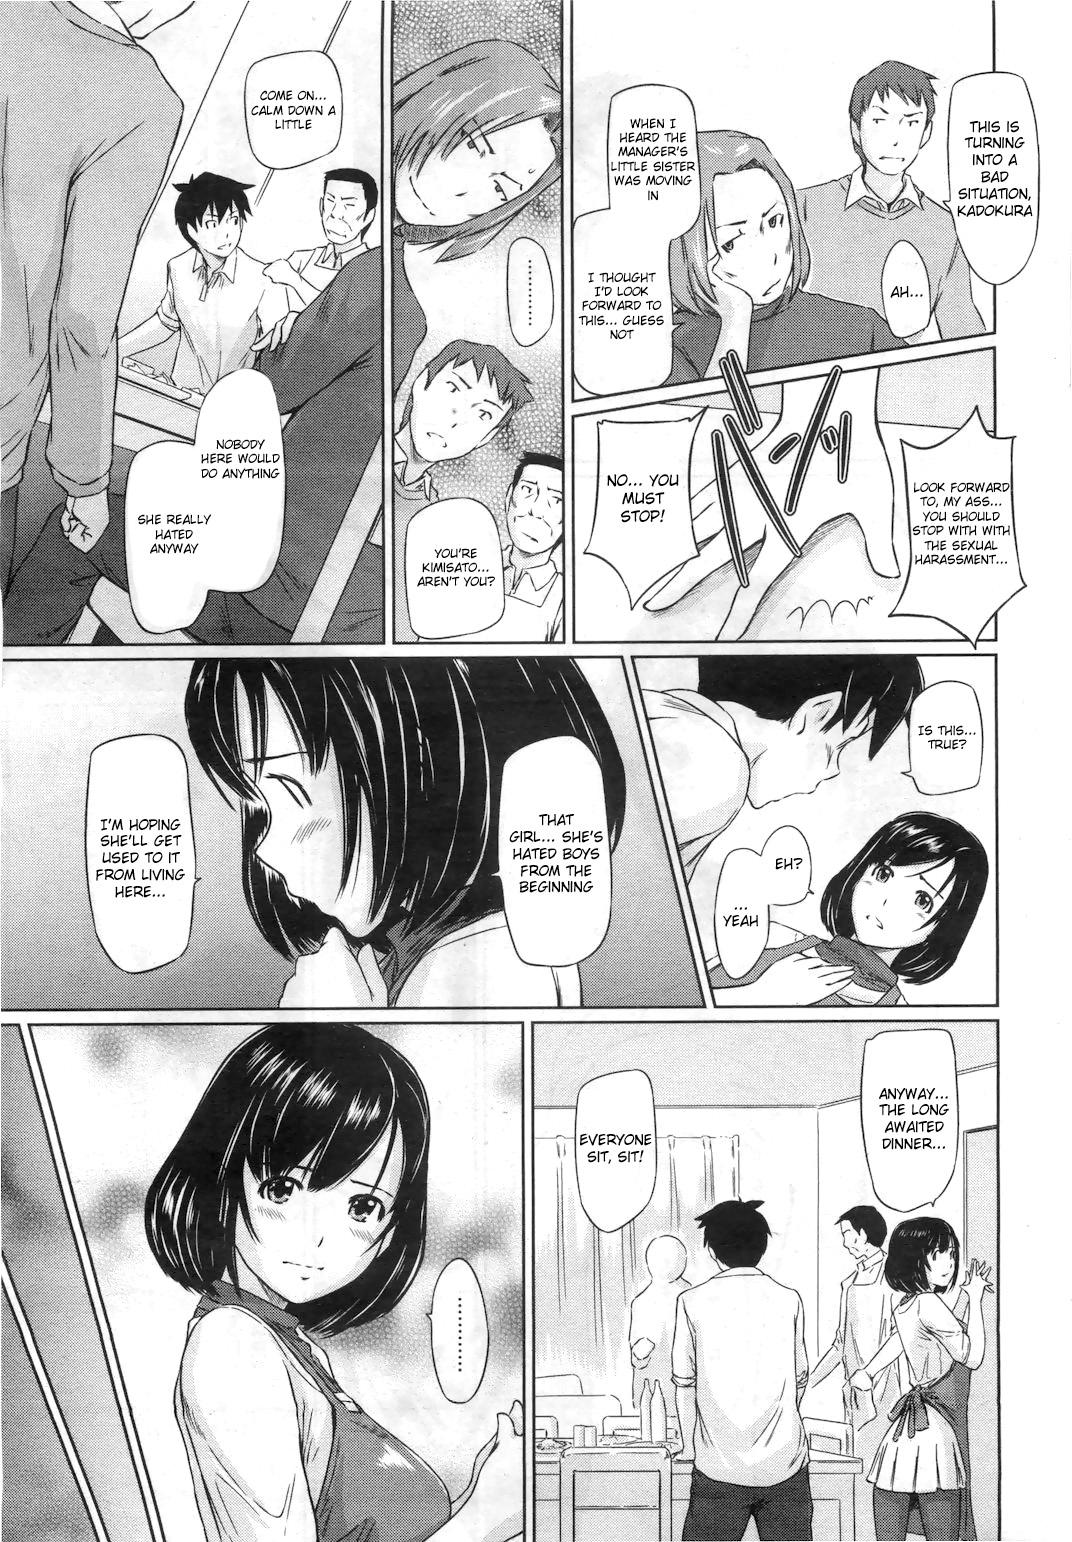 Sucking Cocks Welcome to Tokoharusou Chapter 1 Curvy - Page 7